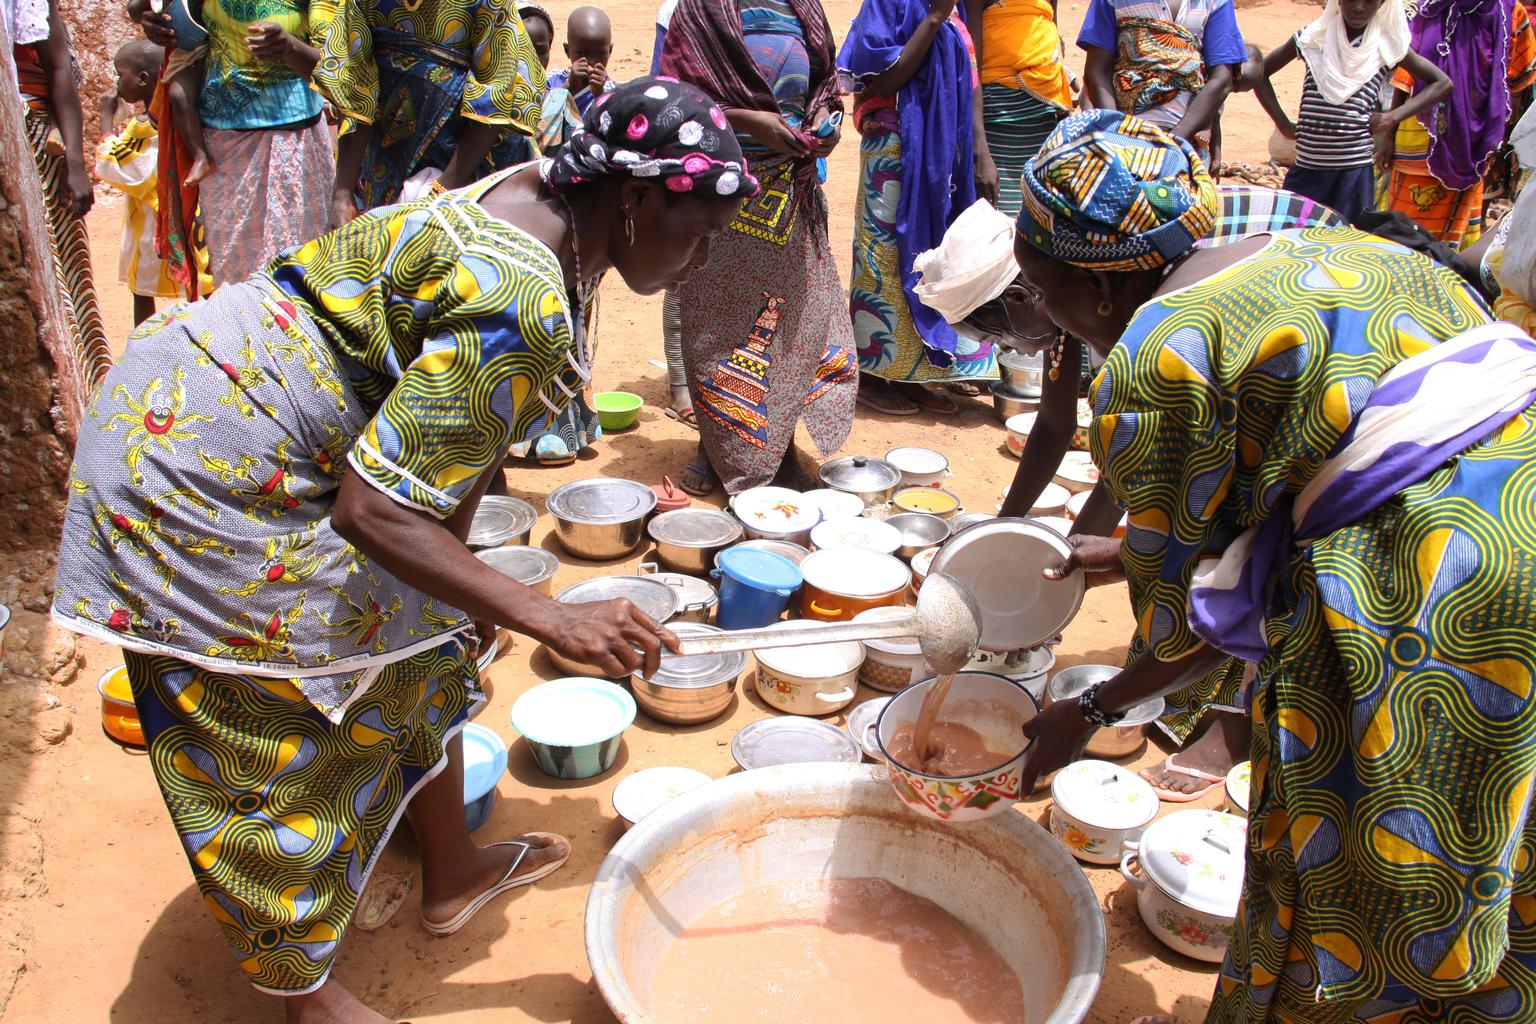 Burkina Faso’s Common Nutrition Narrative outlines the measures taken by UN agencies to improve nutrition